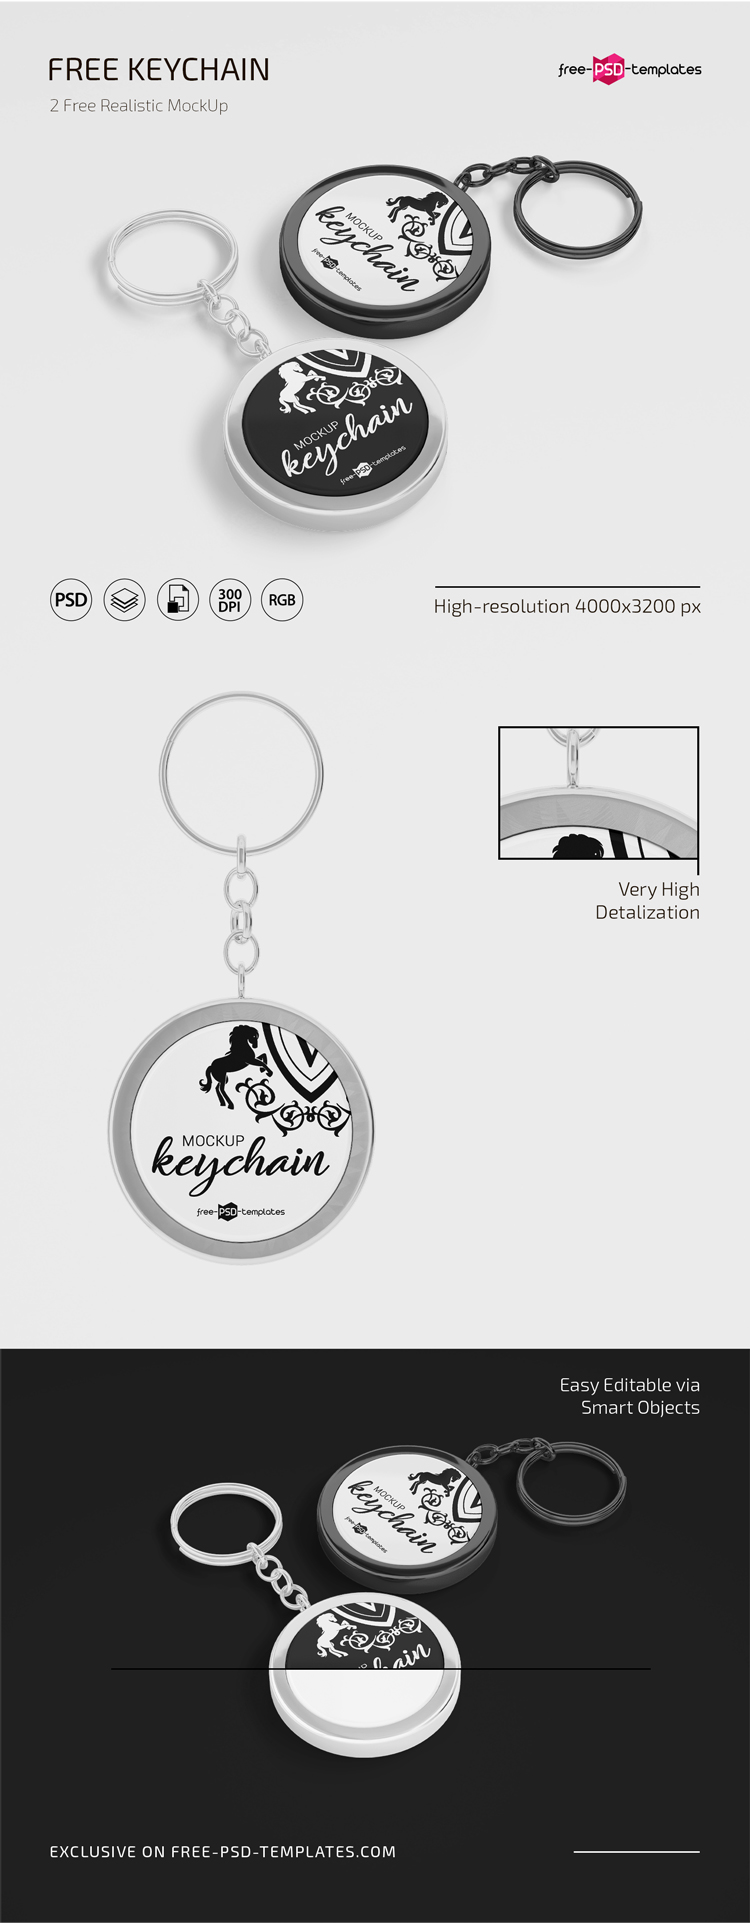 Download Keychain Mockup Psd Free Download Download Free And Premium Psd Mockup Templates And Design Assets PSD Mockup Templates